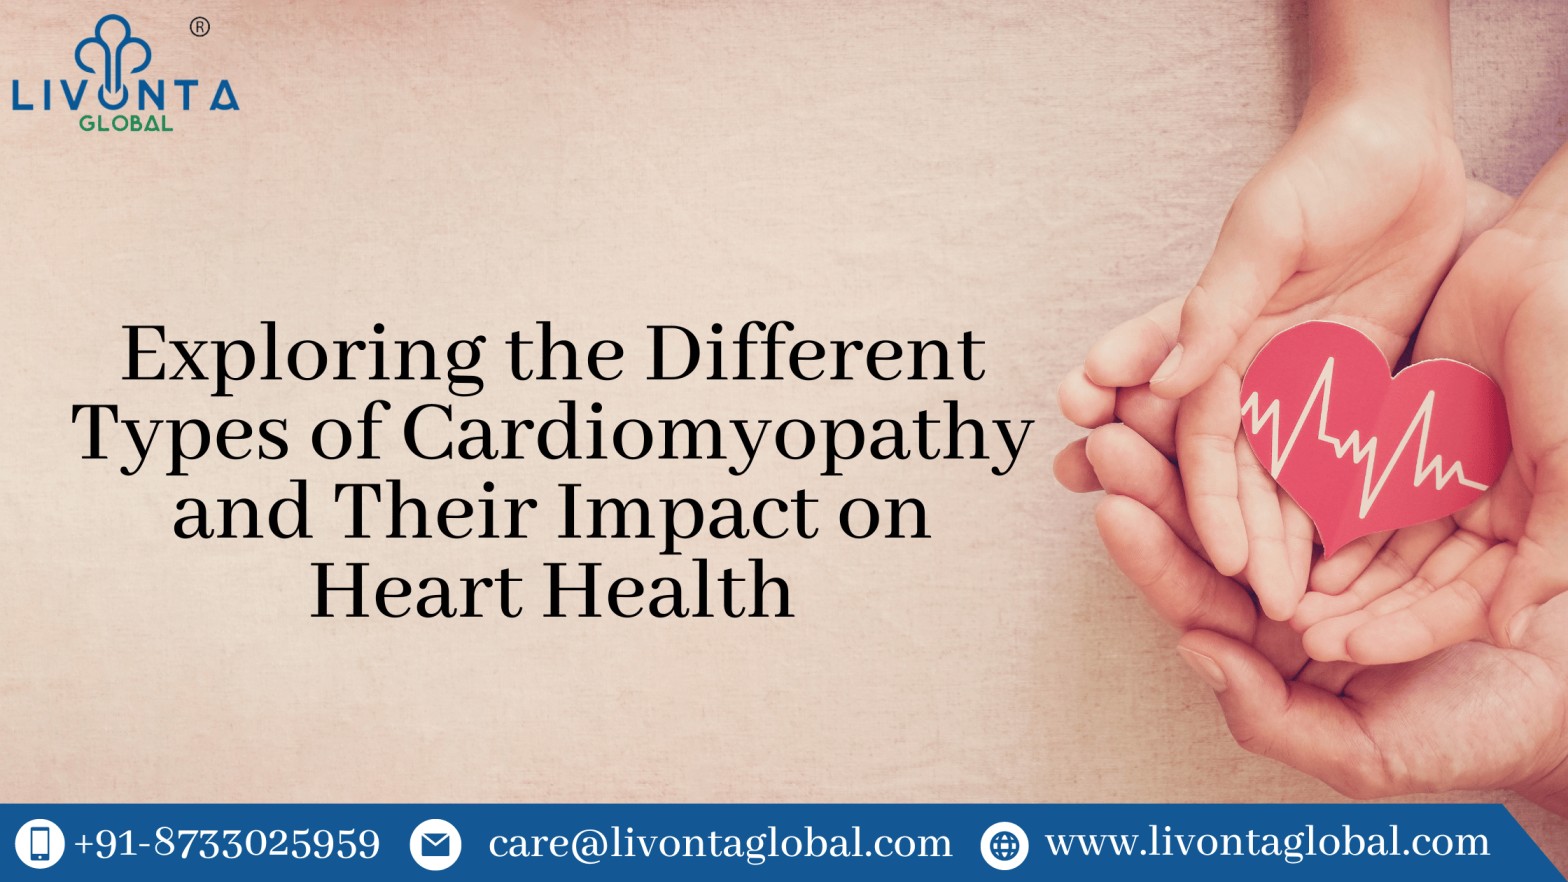 Exploring the Different Types of Cardiomyopathy and Their Impact on Heart Health